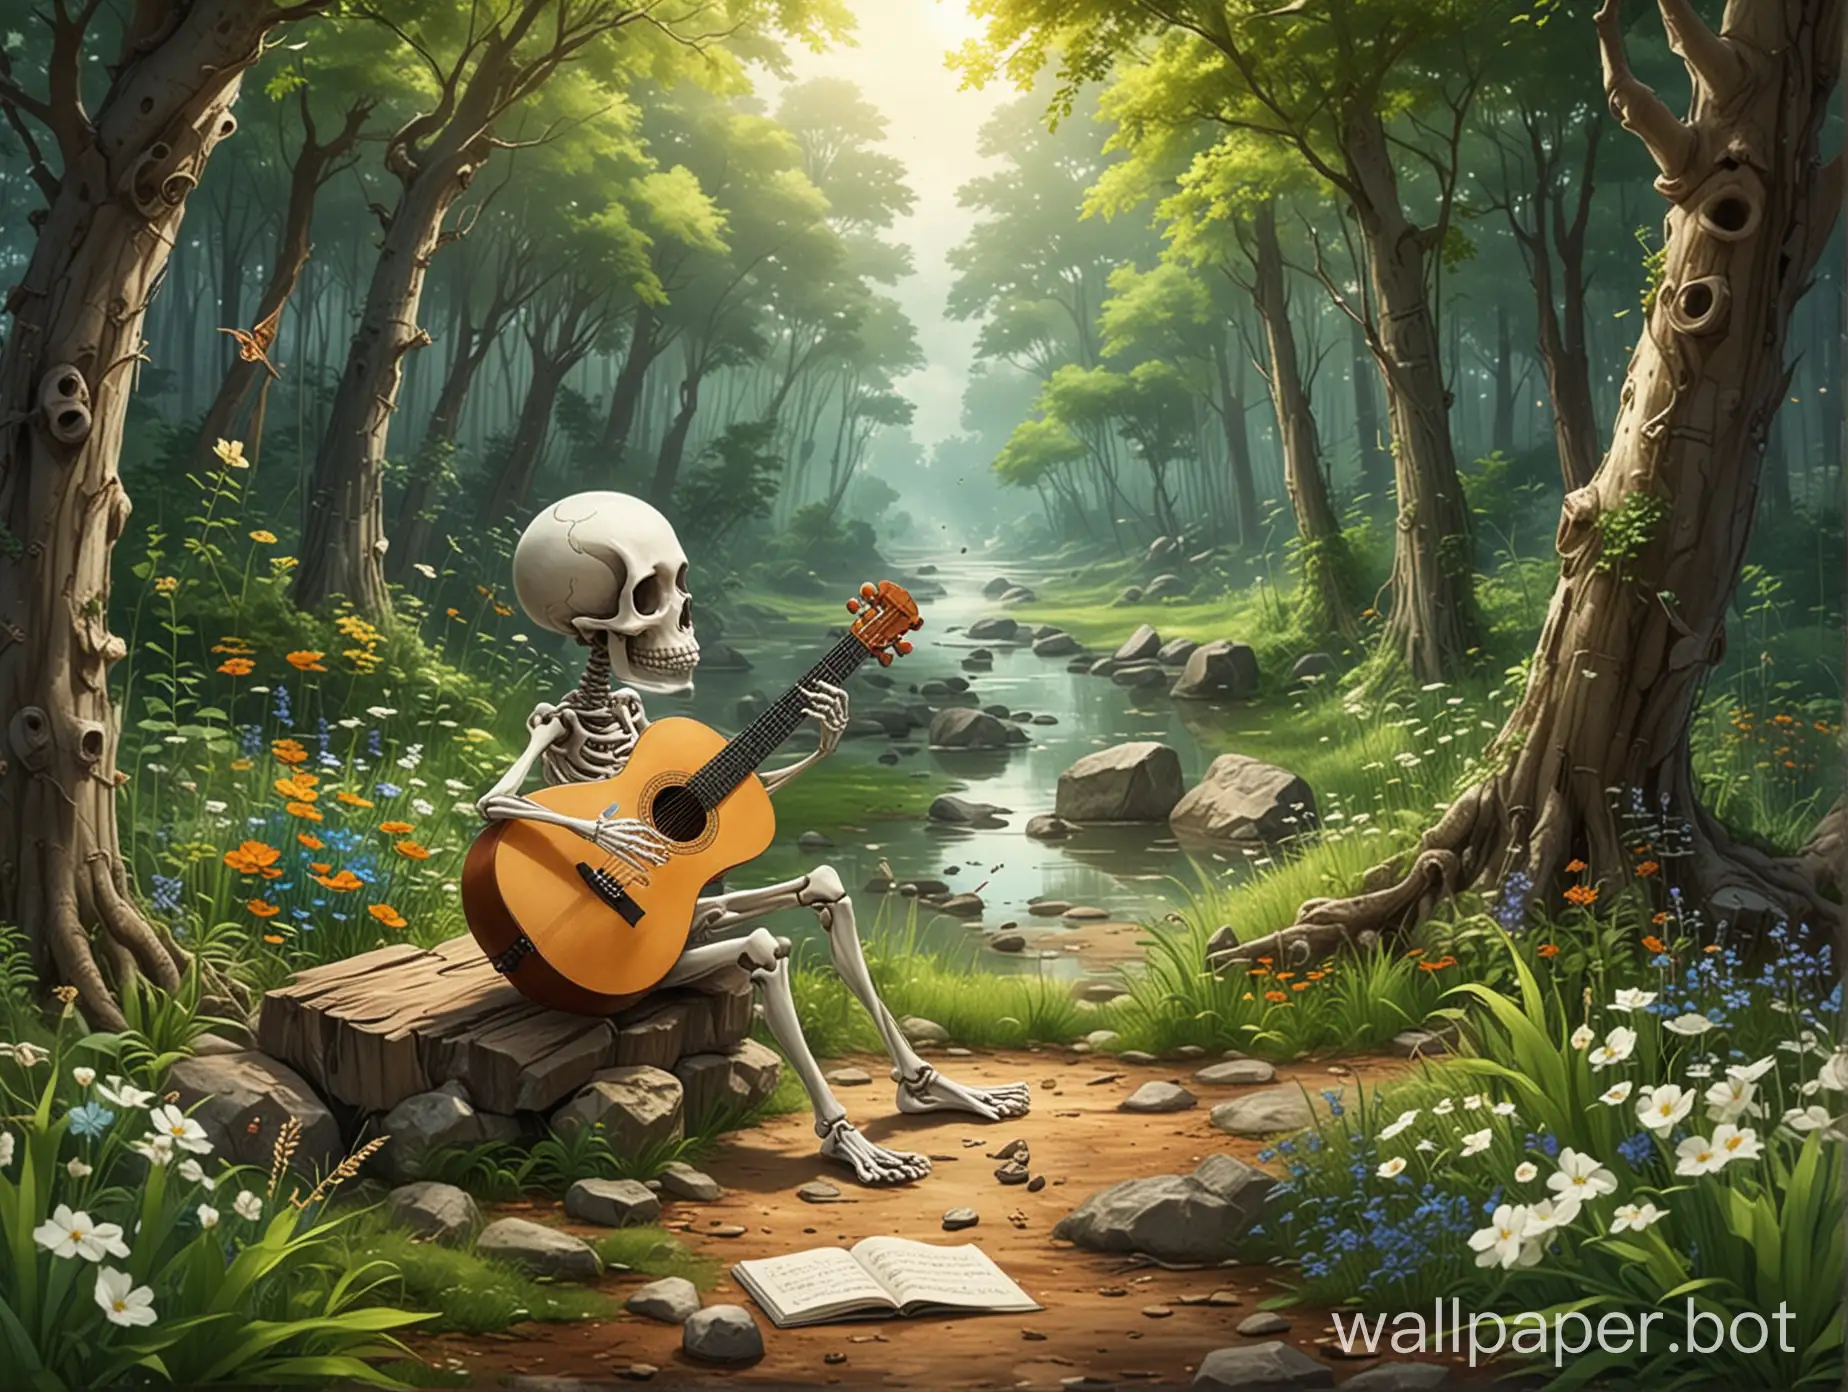 A boney enjoying in the nature relaxing humming a melody song surrounded by the artistic environment canvas and stationary . give me a anime version